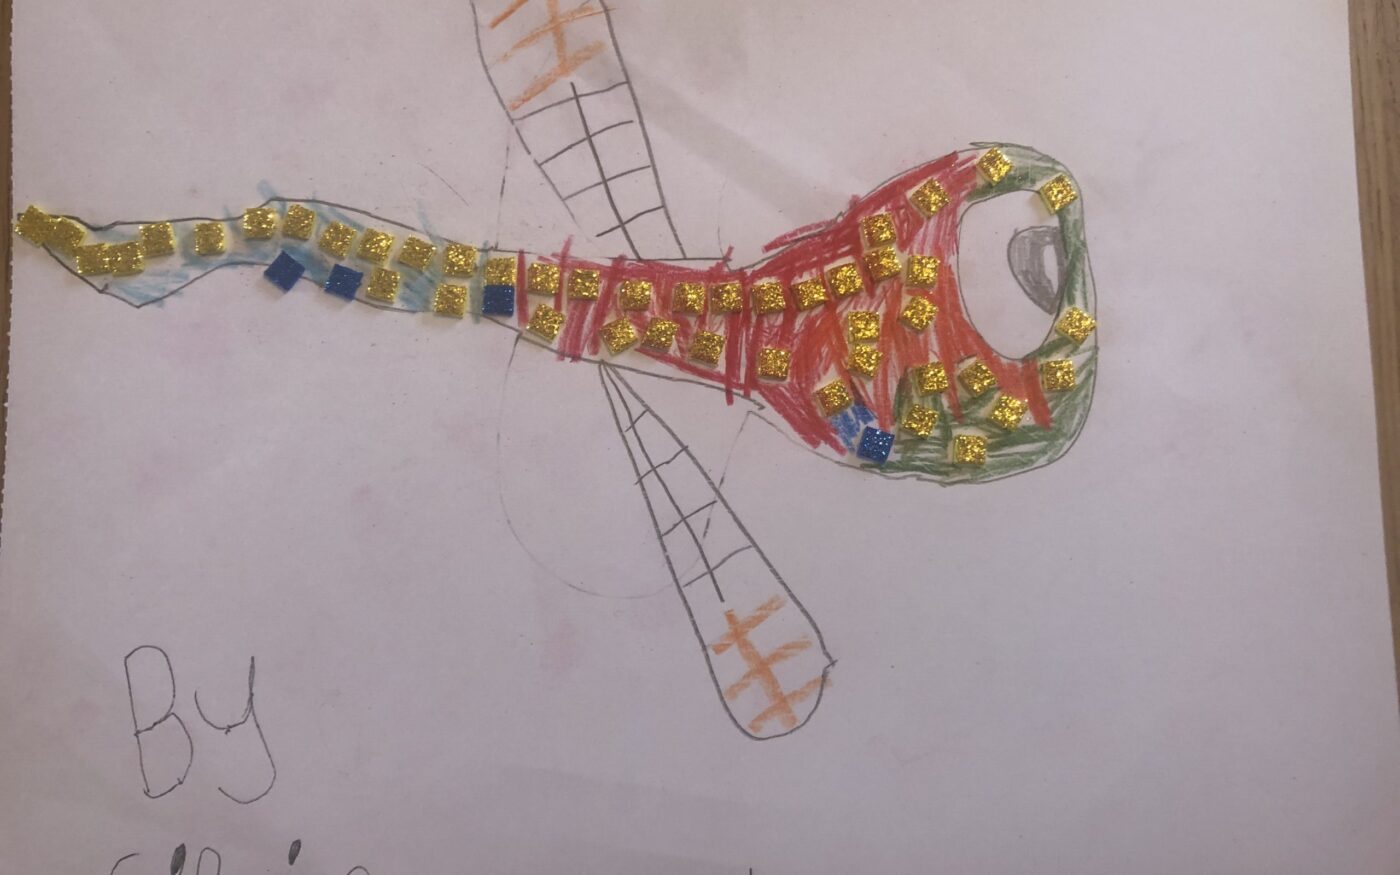 Dragonfly Sparkle by Cillian Farrell, 1st place in age 3-7 category, Insect Week 2022 art competition